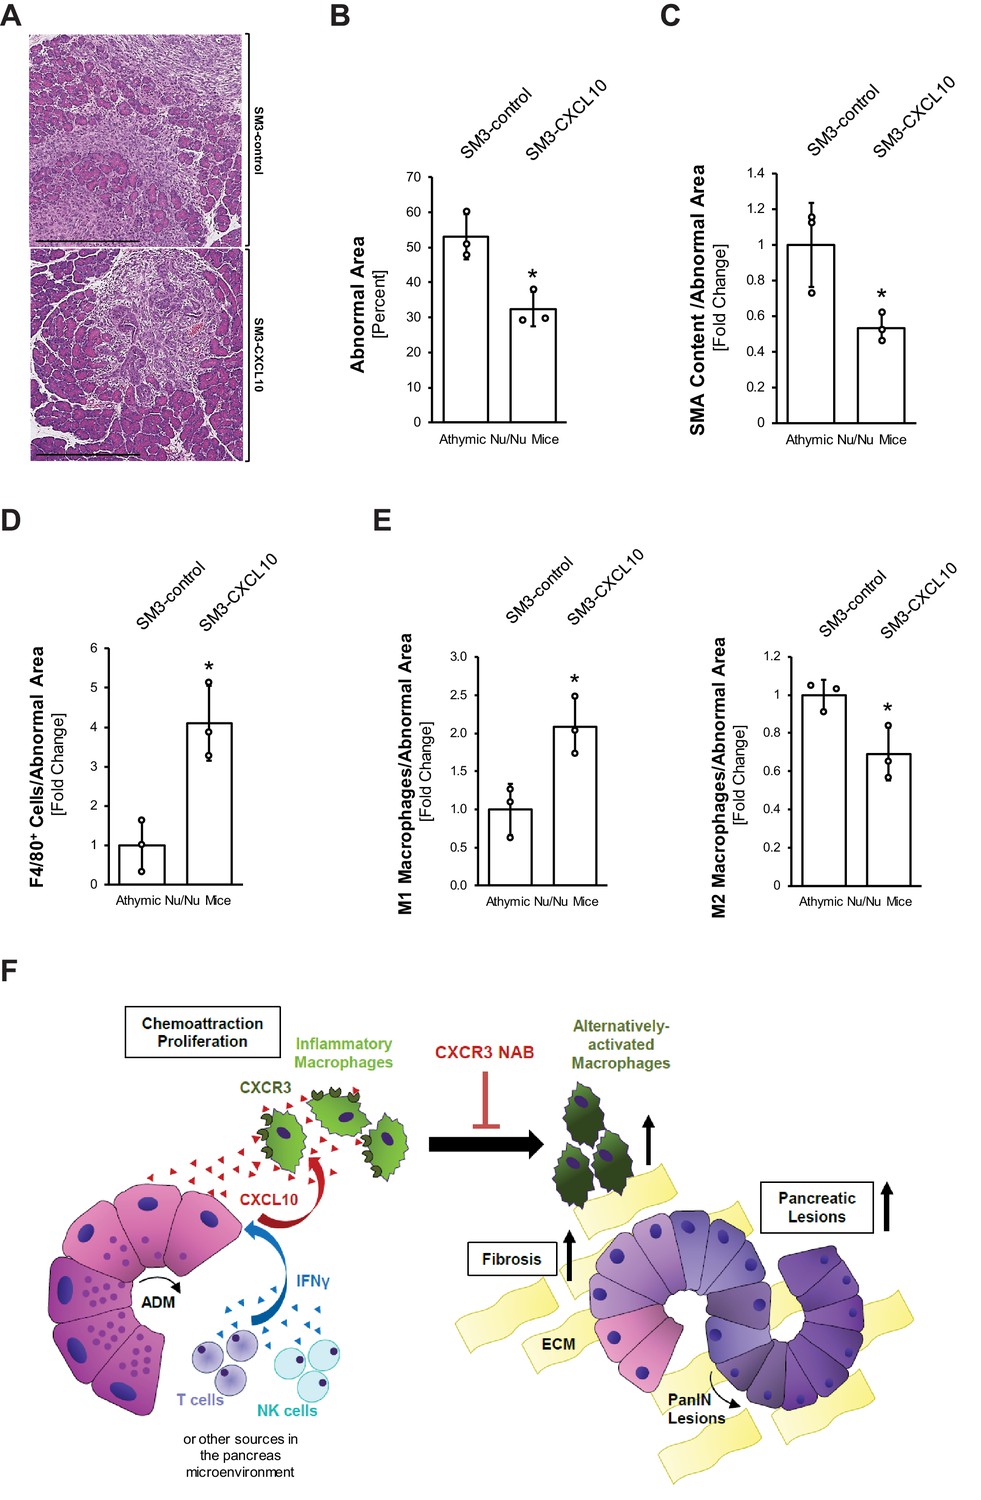 CXCL10/CXCR3 signaling contributes to an inflammatory microenvironment and  its blockade enhances progression of murine pancreatic precancerous lesions